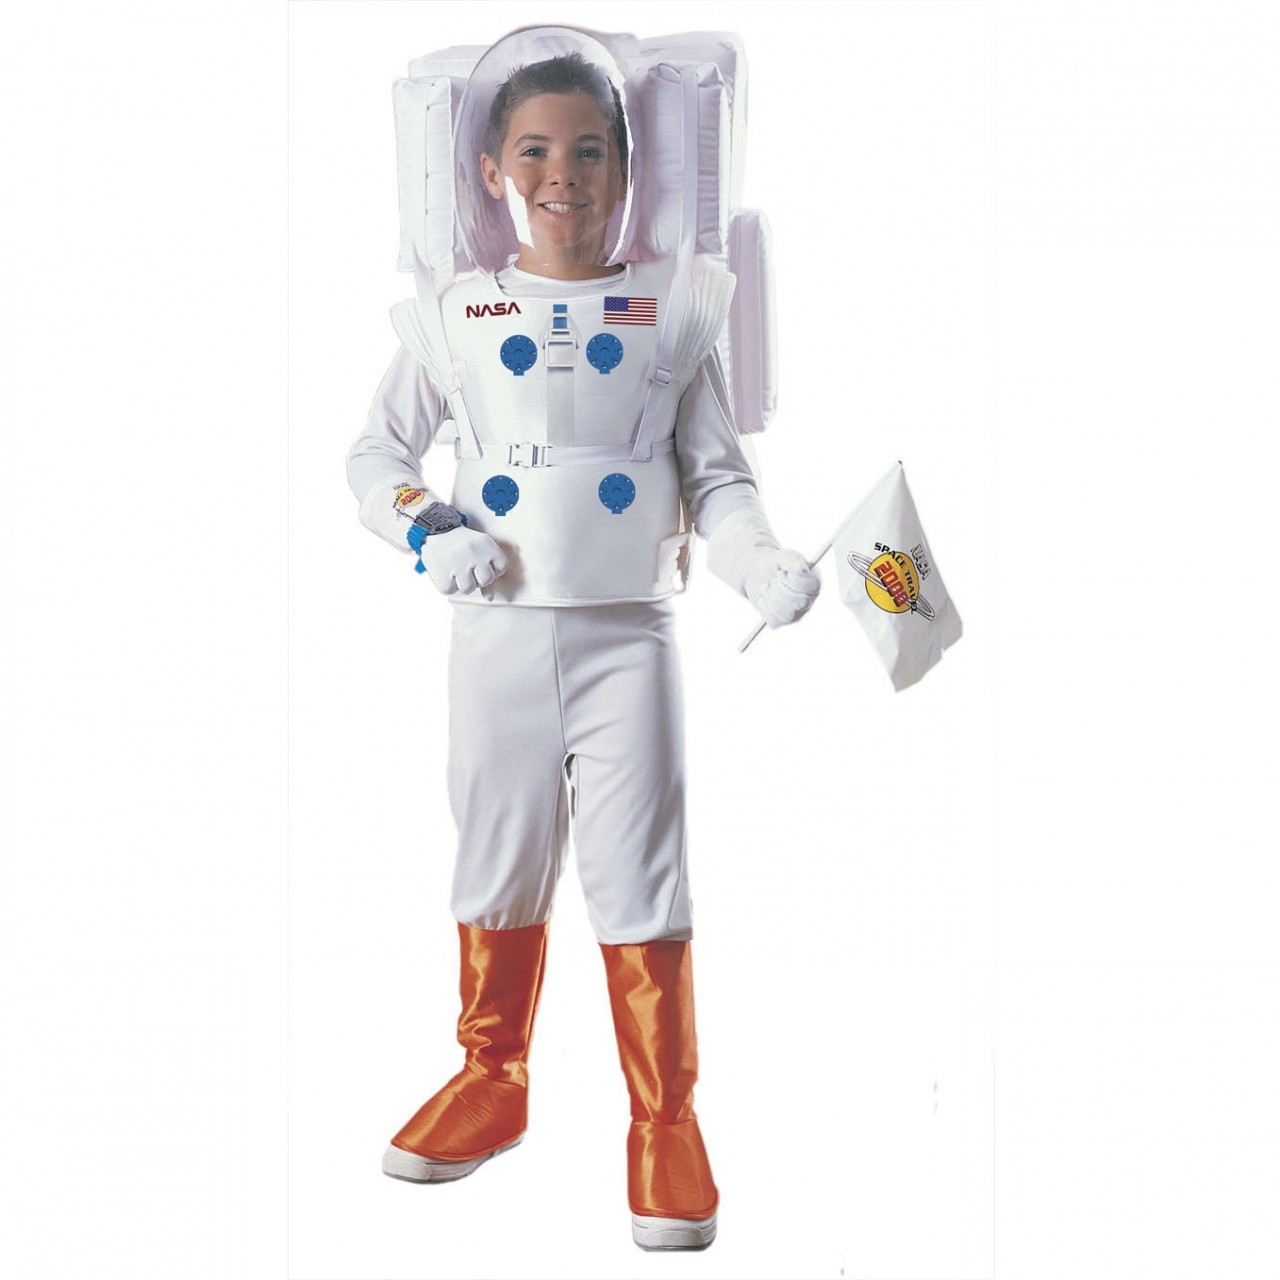 Guardians of the galaxy astronaut spaceman